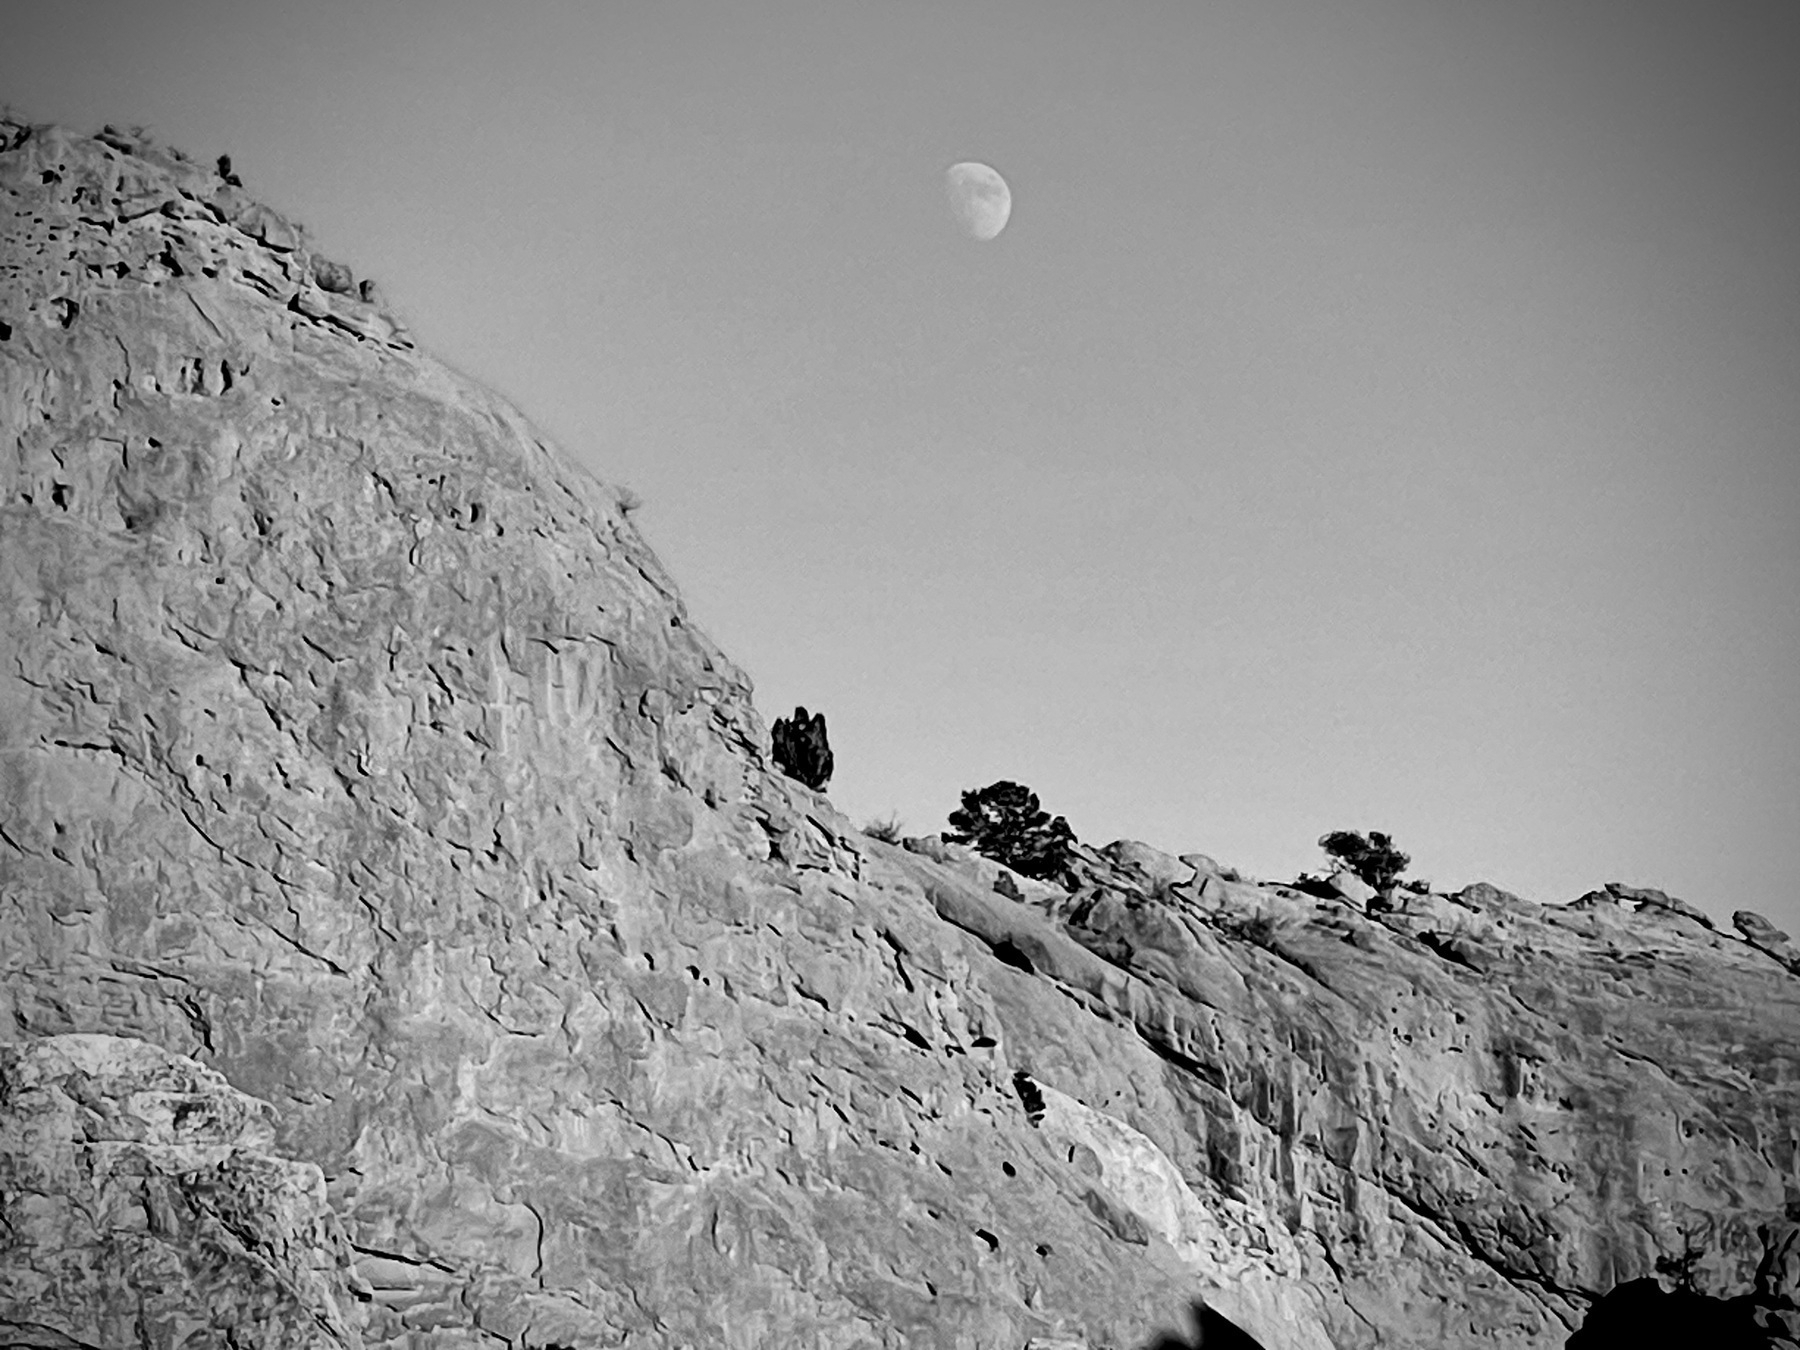 Black and white photo of a rocky cliff with a pale moon in the daytime sky